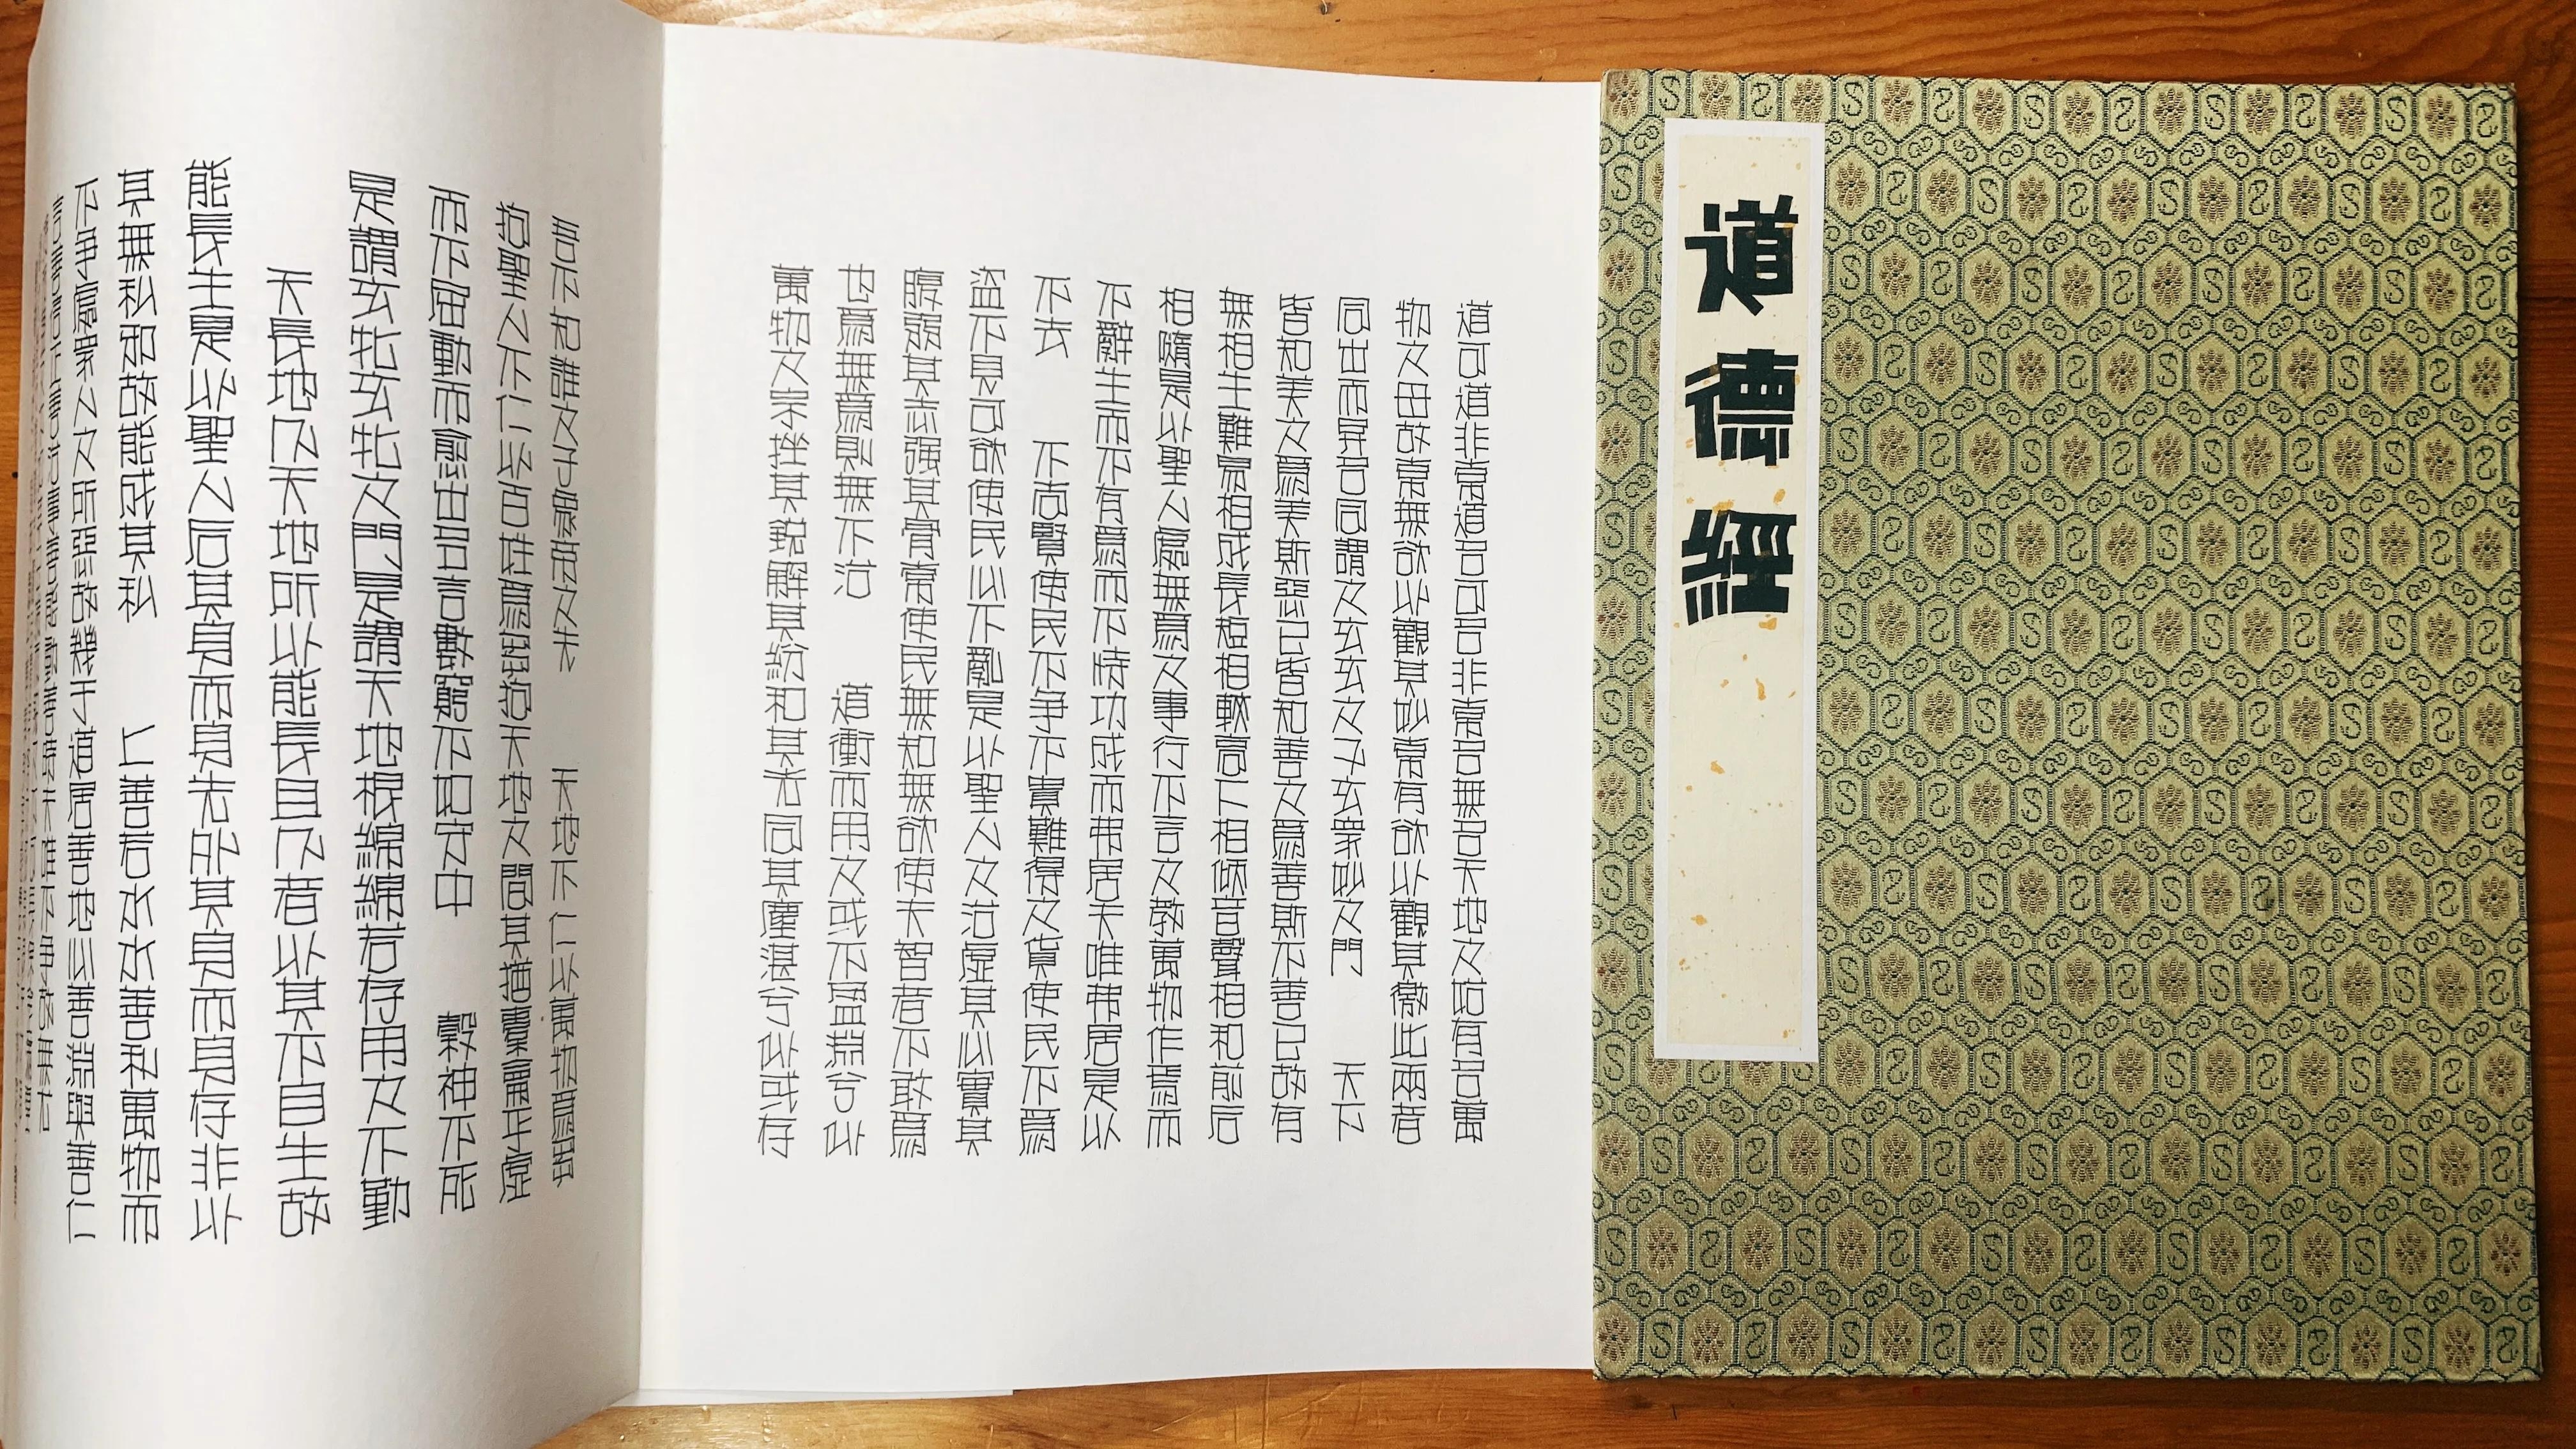 Hand-drawn POP fonts copy the full text of "Tao Te Ching"